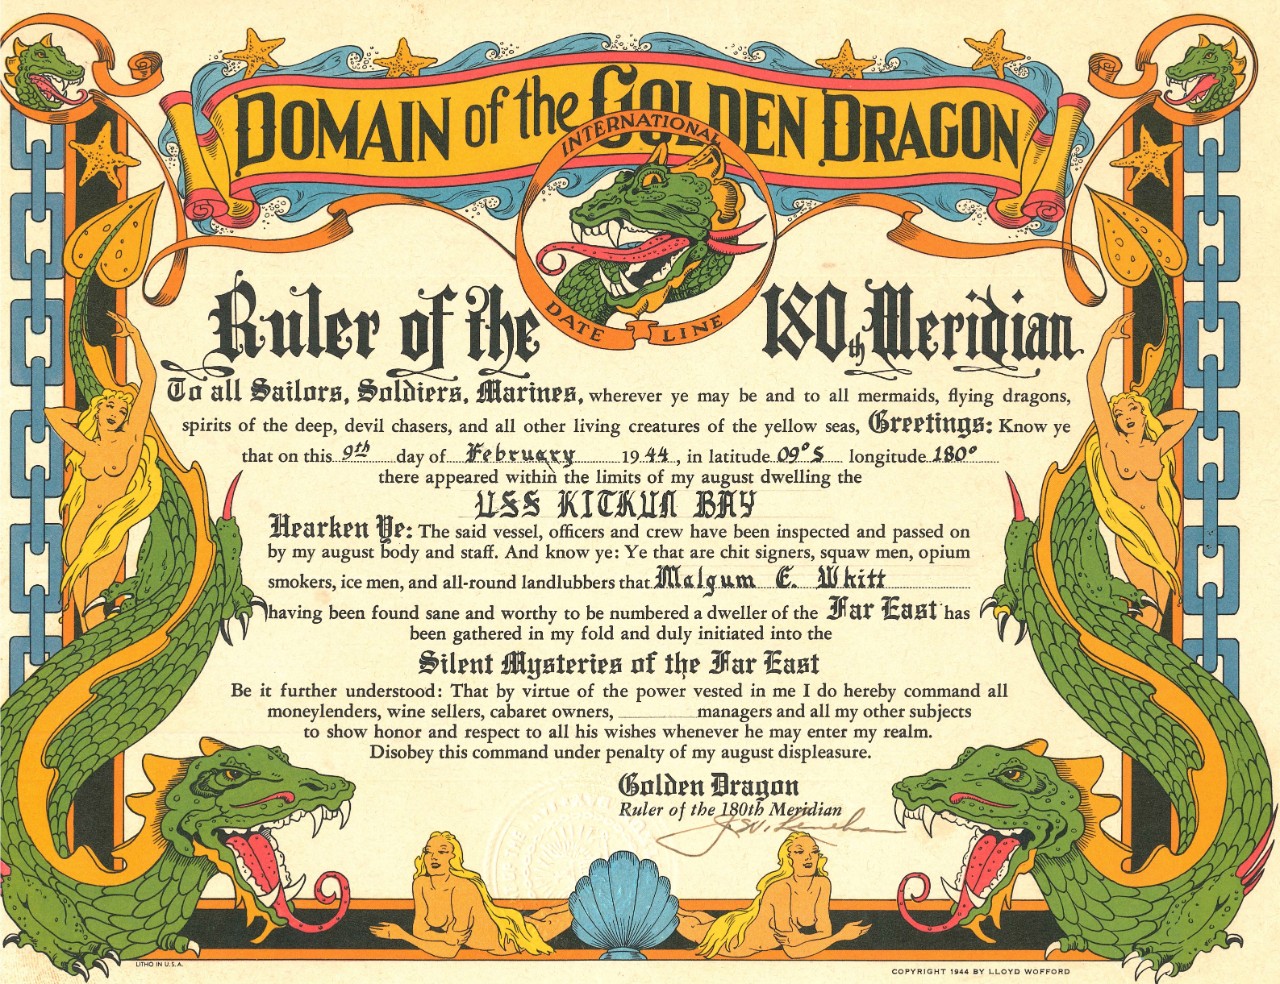 This colorful certificate marks C. Phm. Whitt's entering the Domain of the Golden Dragon as the ship crosses the 180th meridian three days later, 9 February 1944. (Donated by his son, Cmdr. David M. Whitt, Ships History, Naval History and Heritag...